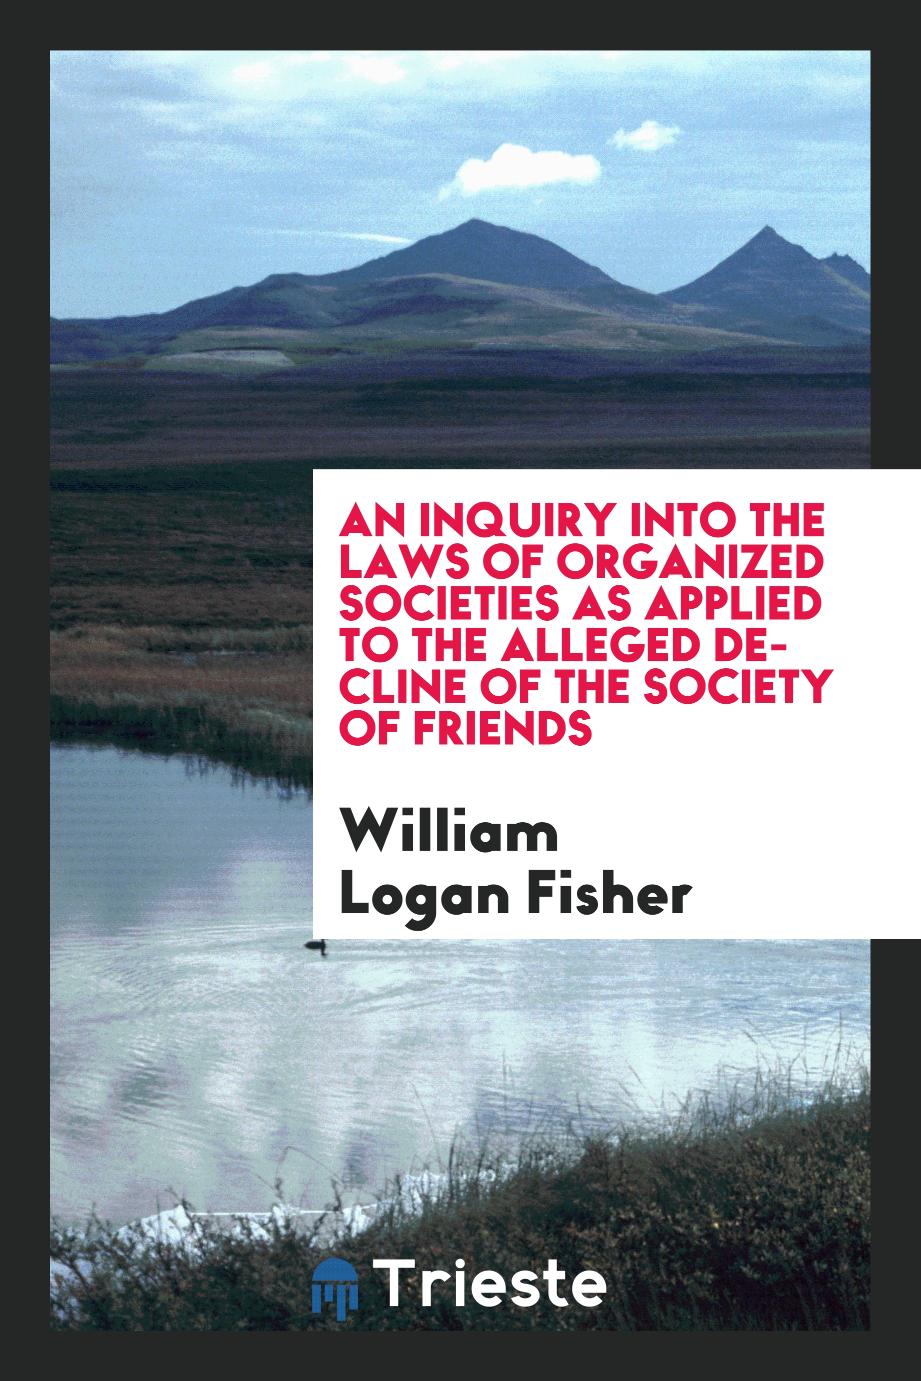 An inquiry into the laws of organized societies as applied to the alleged decline of the Society of Friends